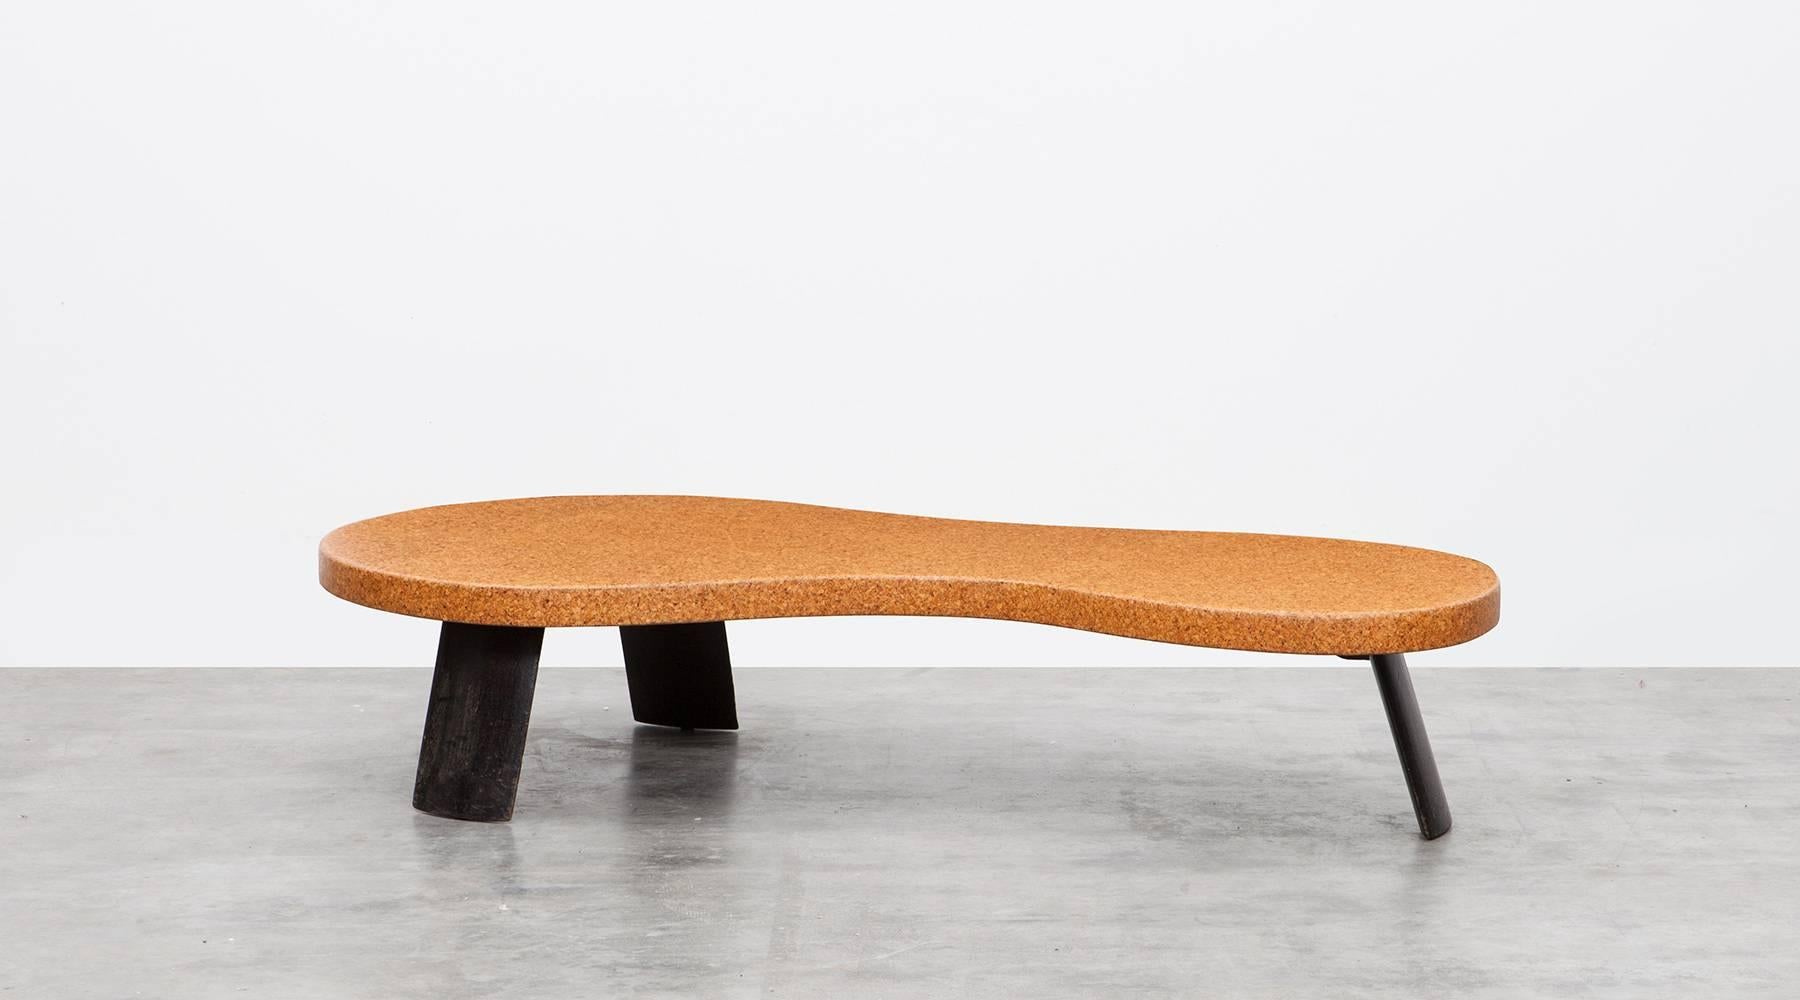 Midcentury coffee table designed by Paul Frankl. Eloquently shaped Tabletop out of cork, comes on three wooden mahogany legs. It can be used as a coffee table or a bench. Manufactured in 1951 by Johnson Furniture. 

Viennese Art Deco furniture